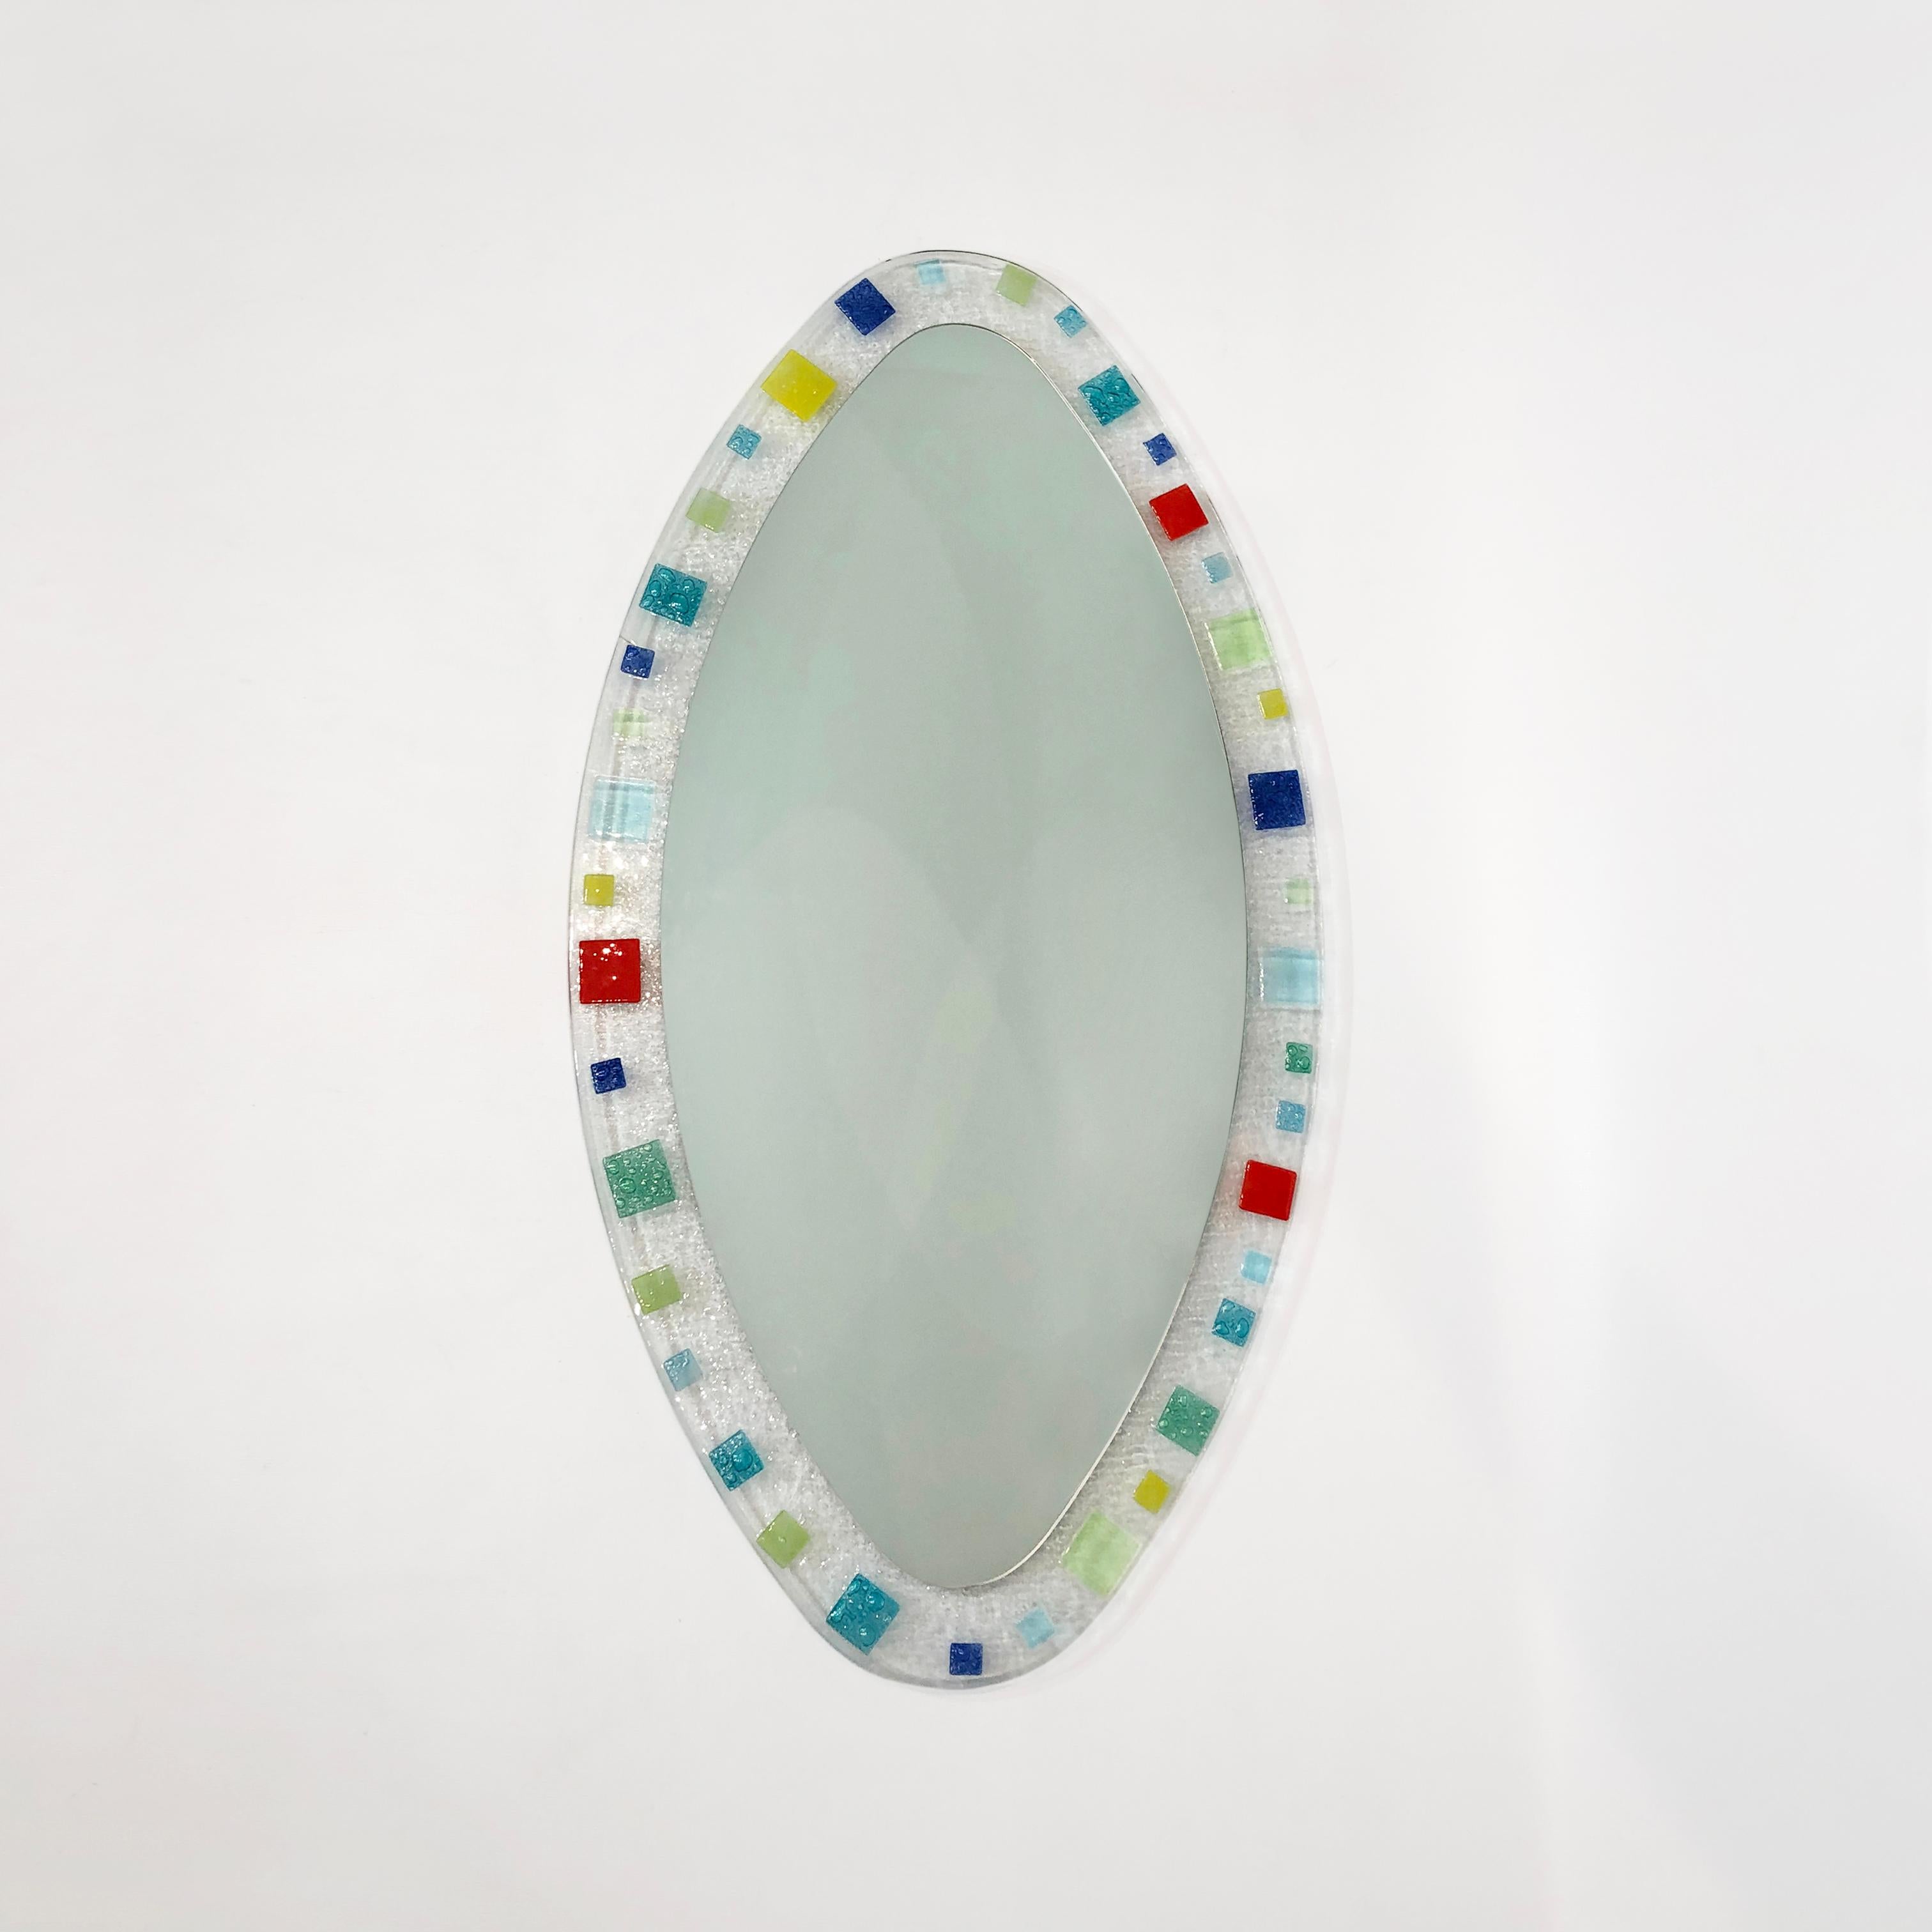 This large oval-shaped mirror, set in a hand blown Murano glass frame and backed by veneered wood, would make a perfect edition in both maximalist or Minimalist rooms. The vibrant reds, greens, and blues of the Italian glass edges draw the eye to